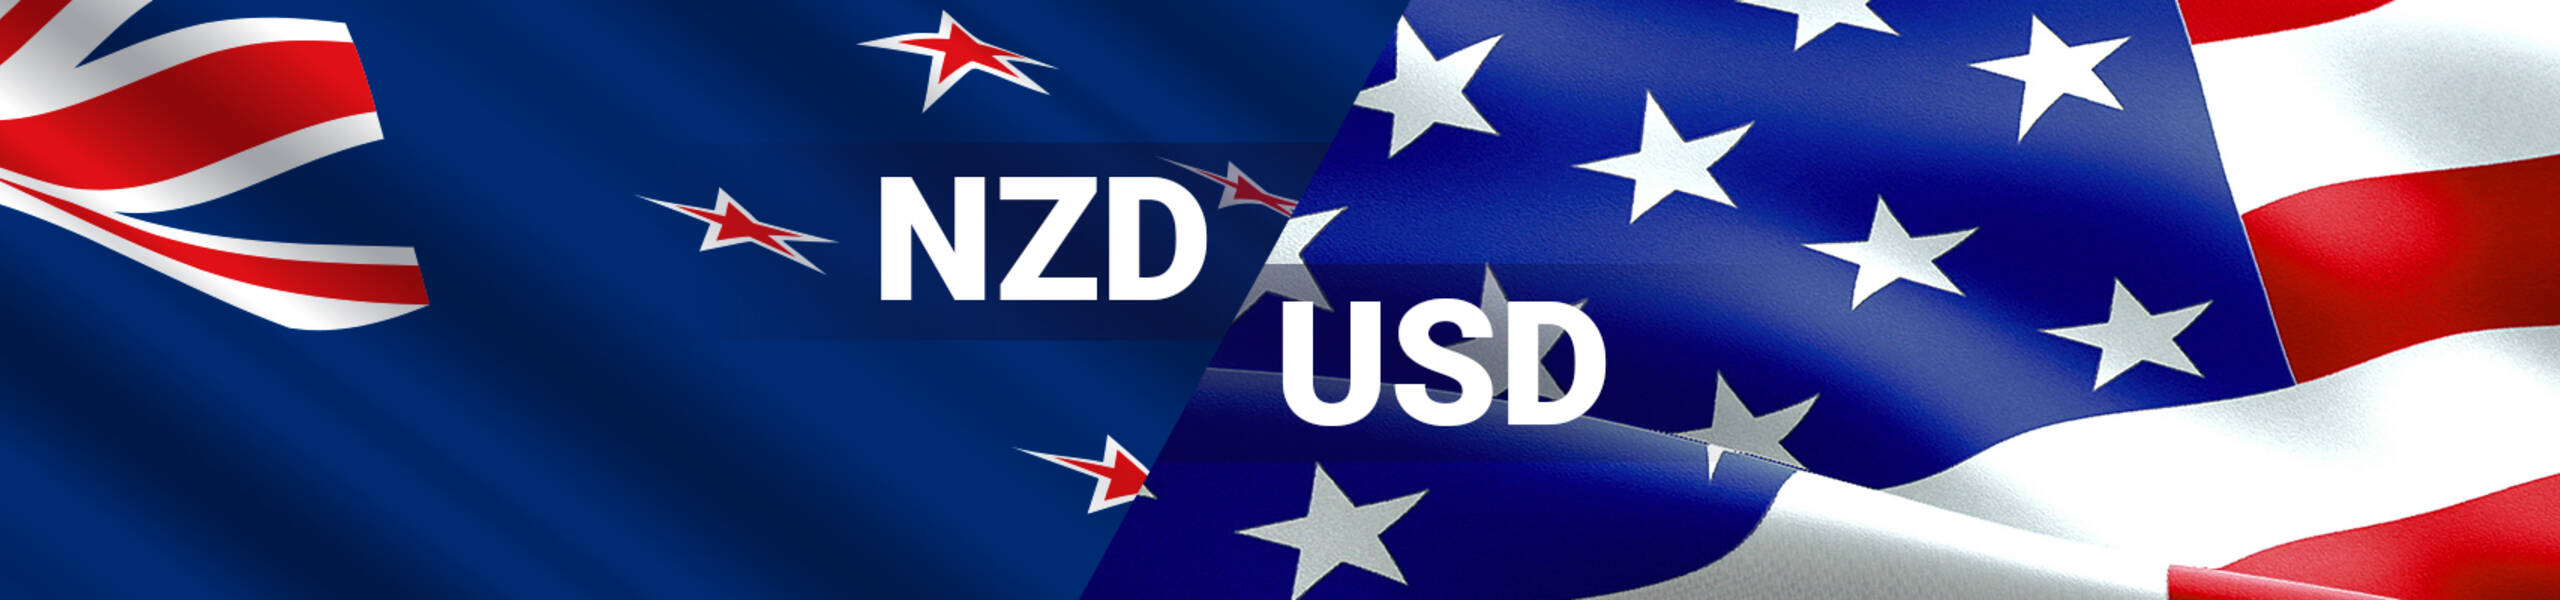 NZD/USD: bulls were spooked by their own audacity